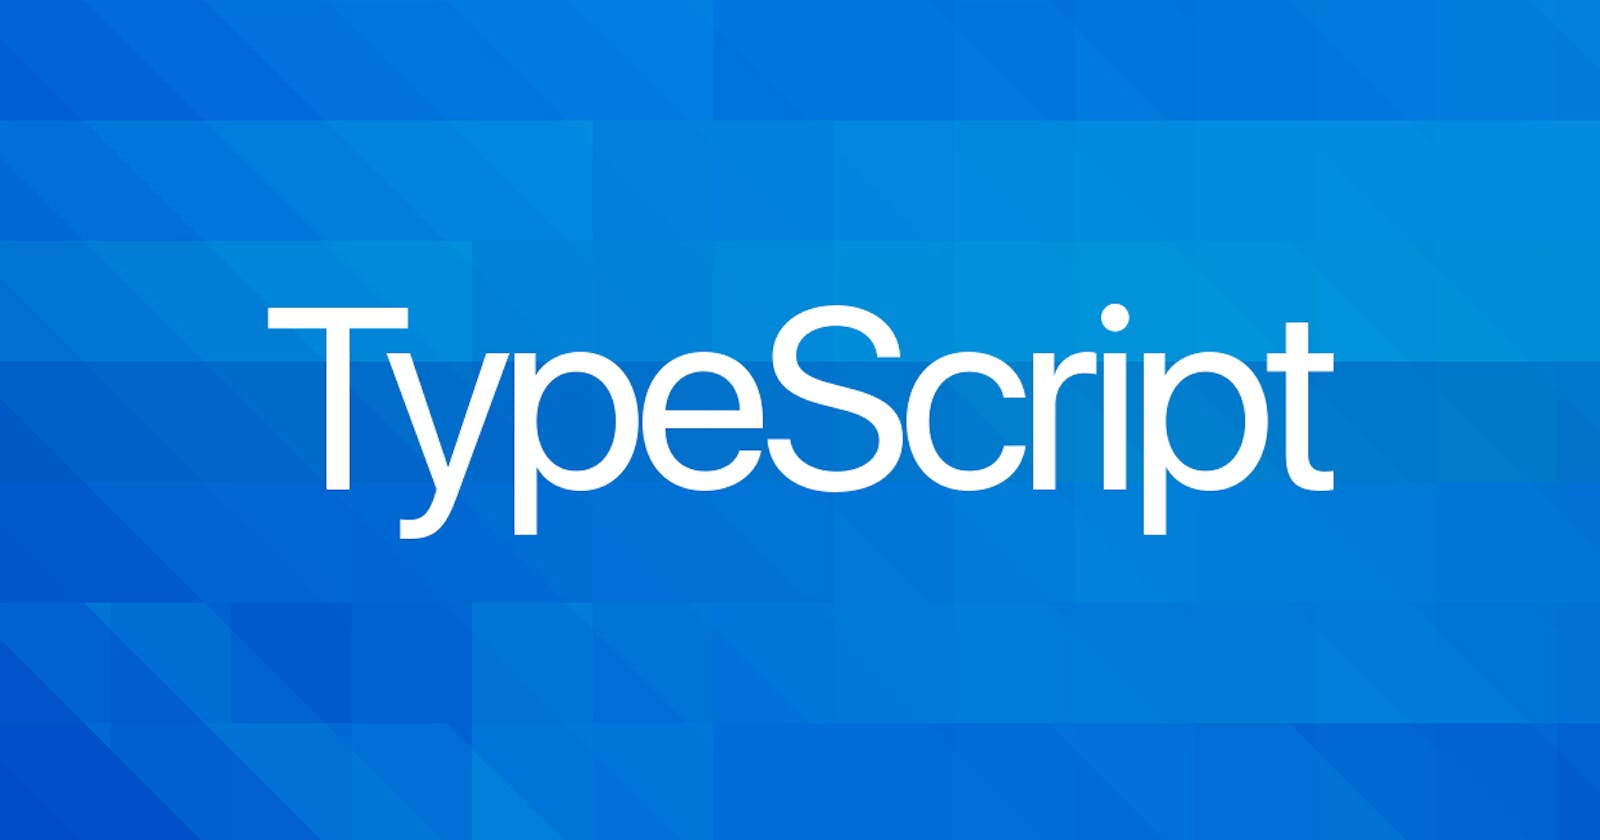 Typescript classes, methods, functions and other gotchas